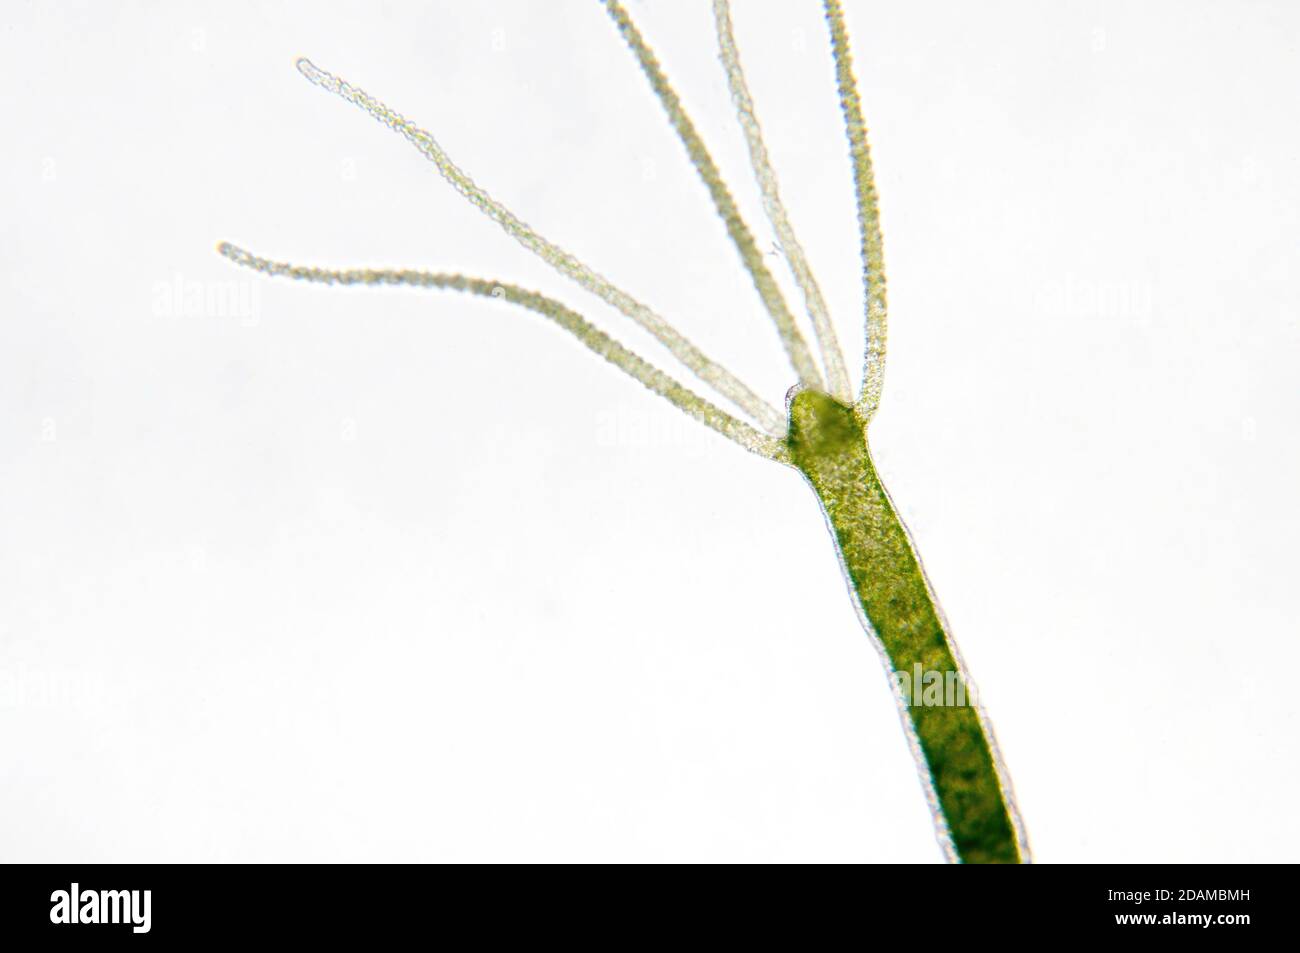 Hydra, light micrograph. Hydra are small freshwater animals of the phylum Cnidaria and class Hydrozoa. Stock Photo